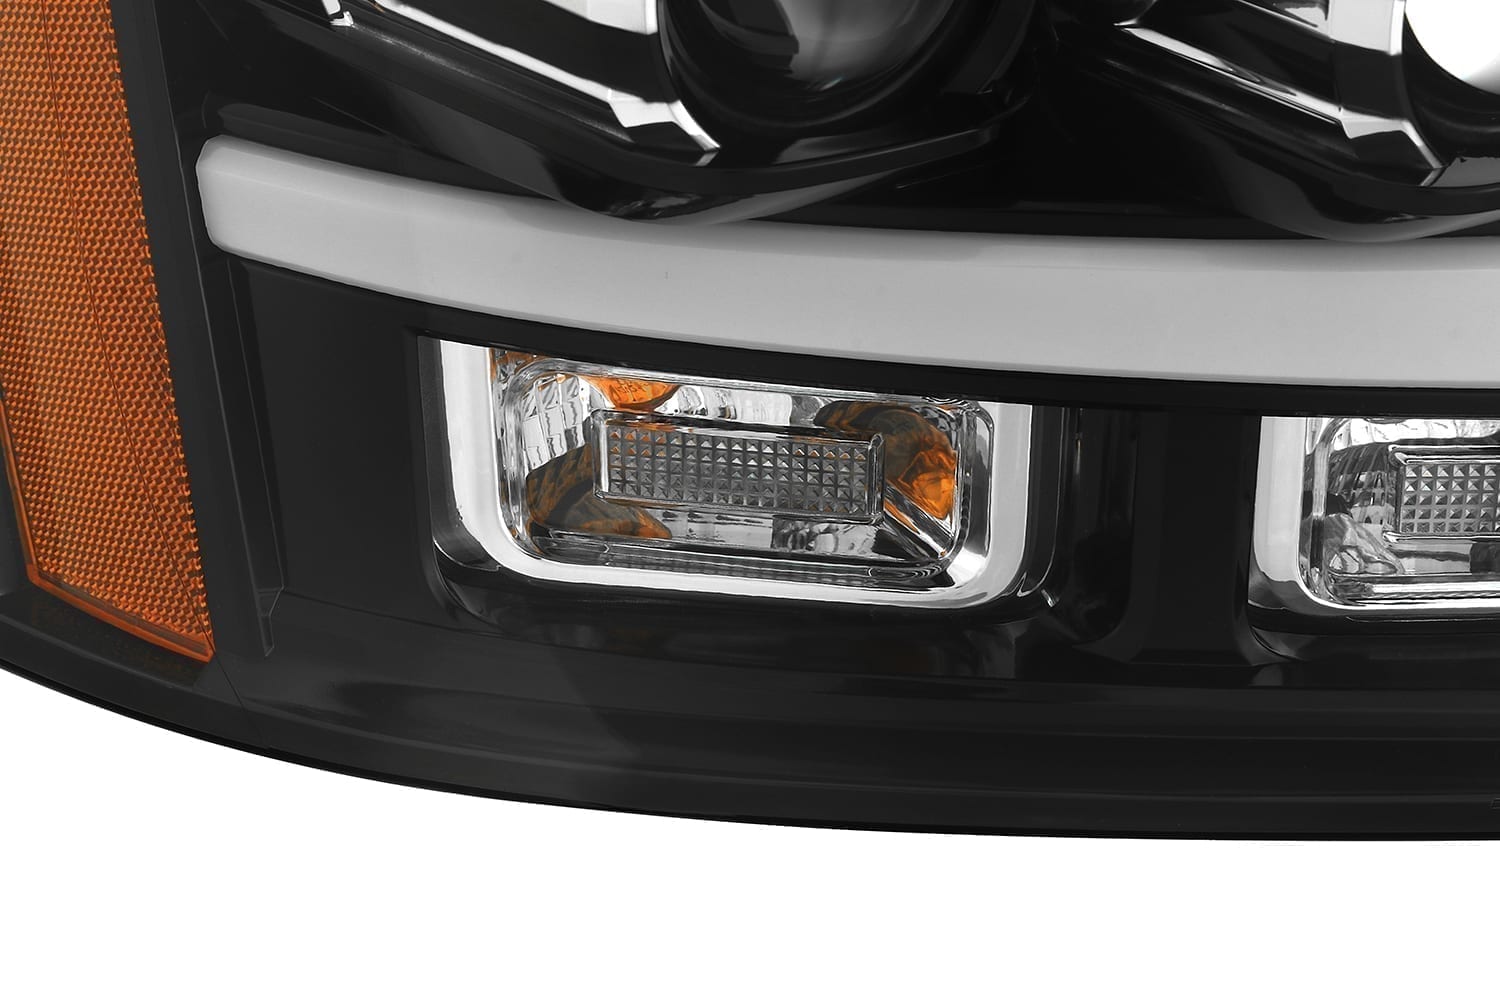 AlphaRex 07-13 Chevy Tahoe PRO-Series Projector Headlights Plank Style Gloss Blk w/Activation Light